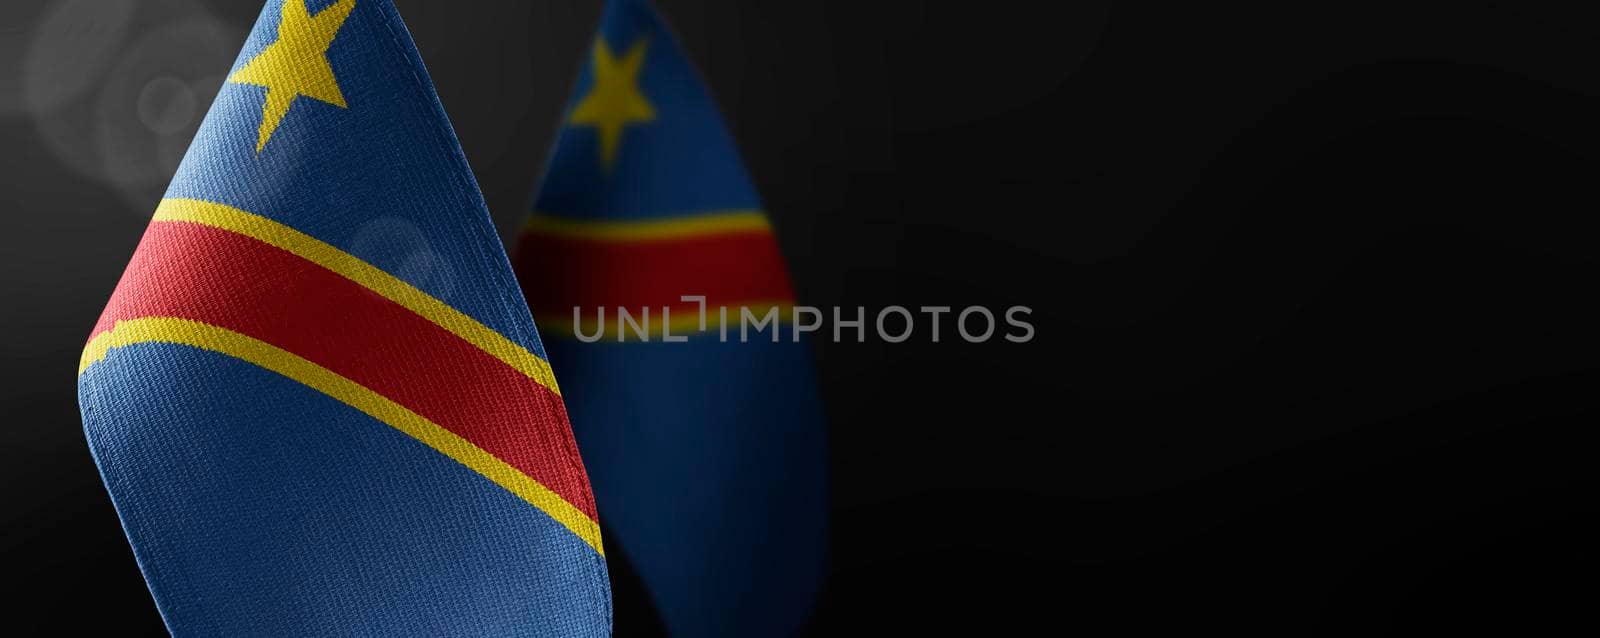 Small national flags of the Democratic Republic of the Congo on a dark background.